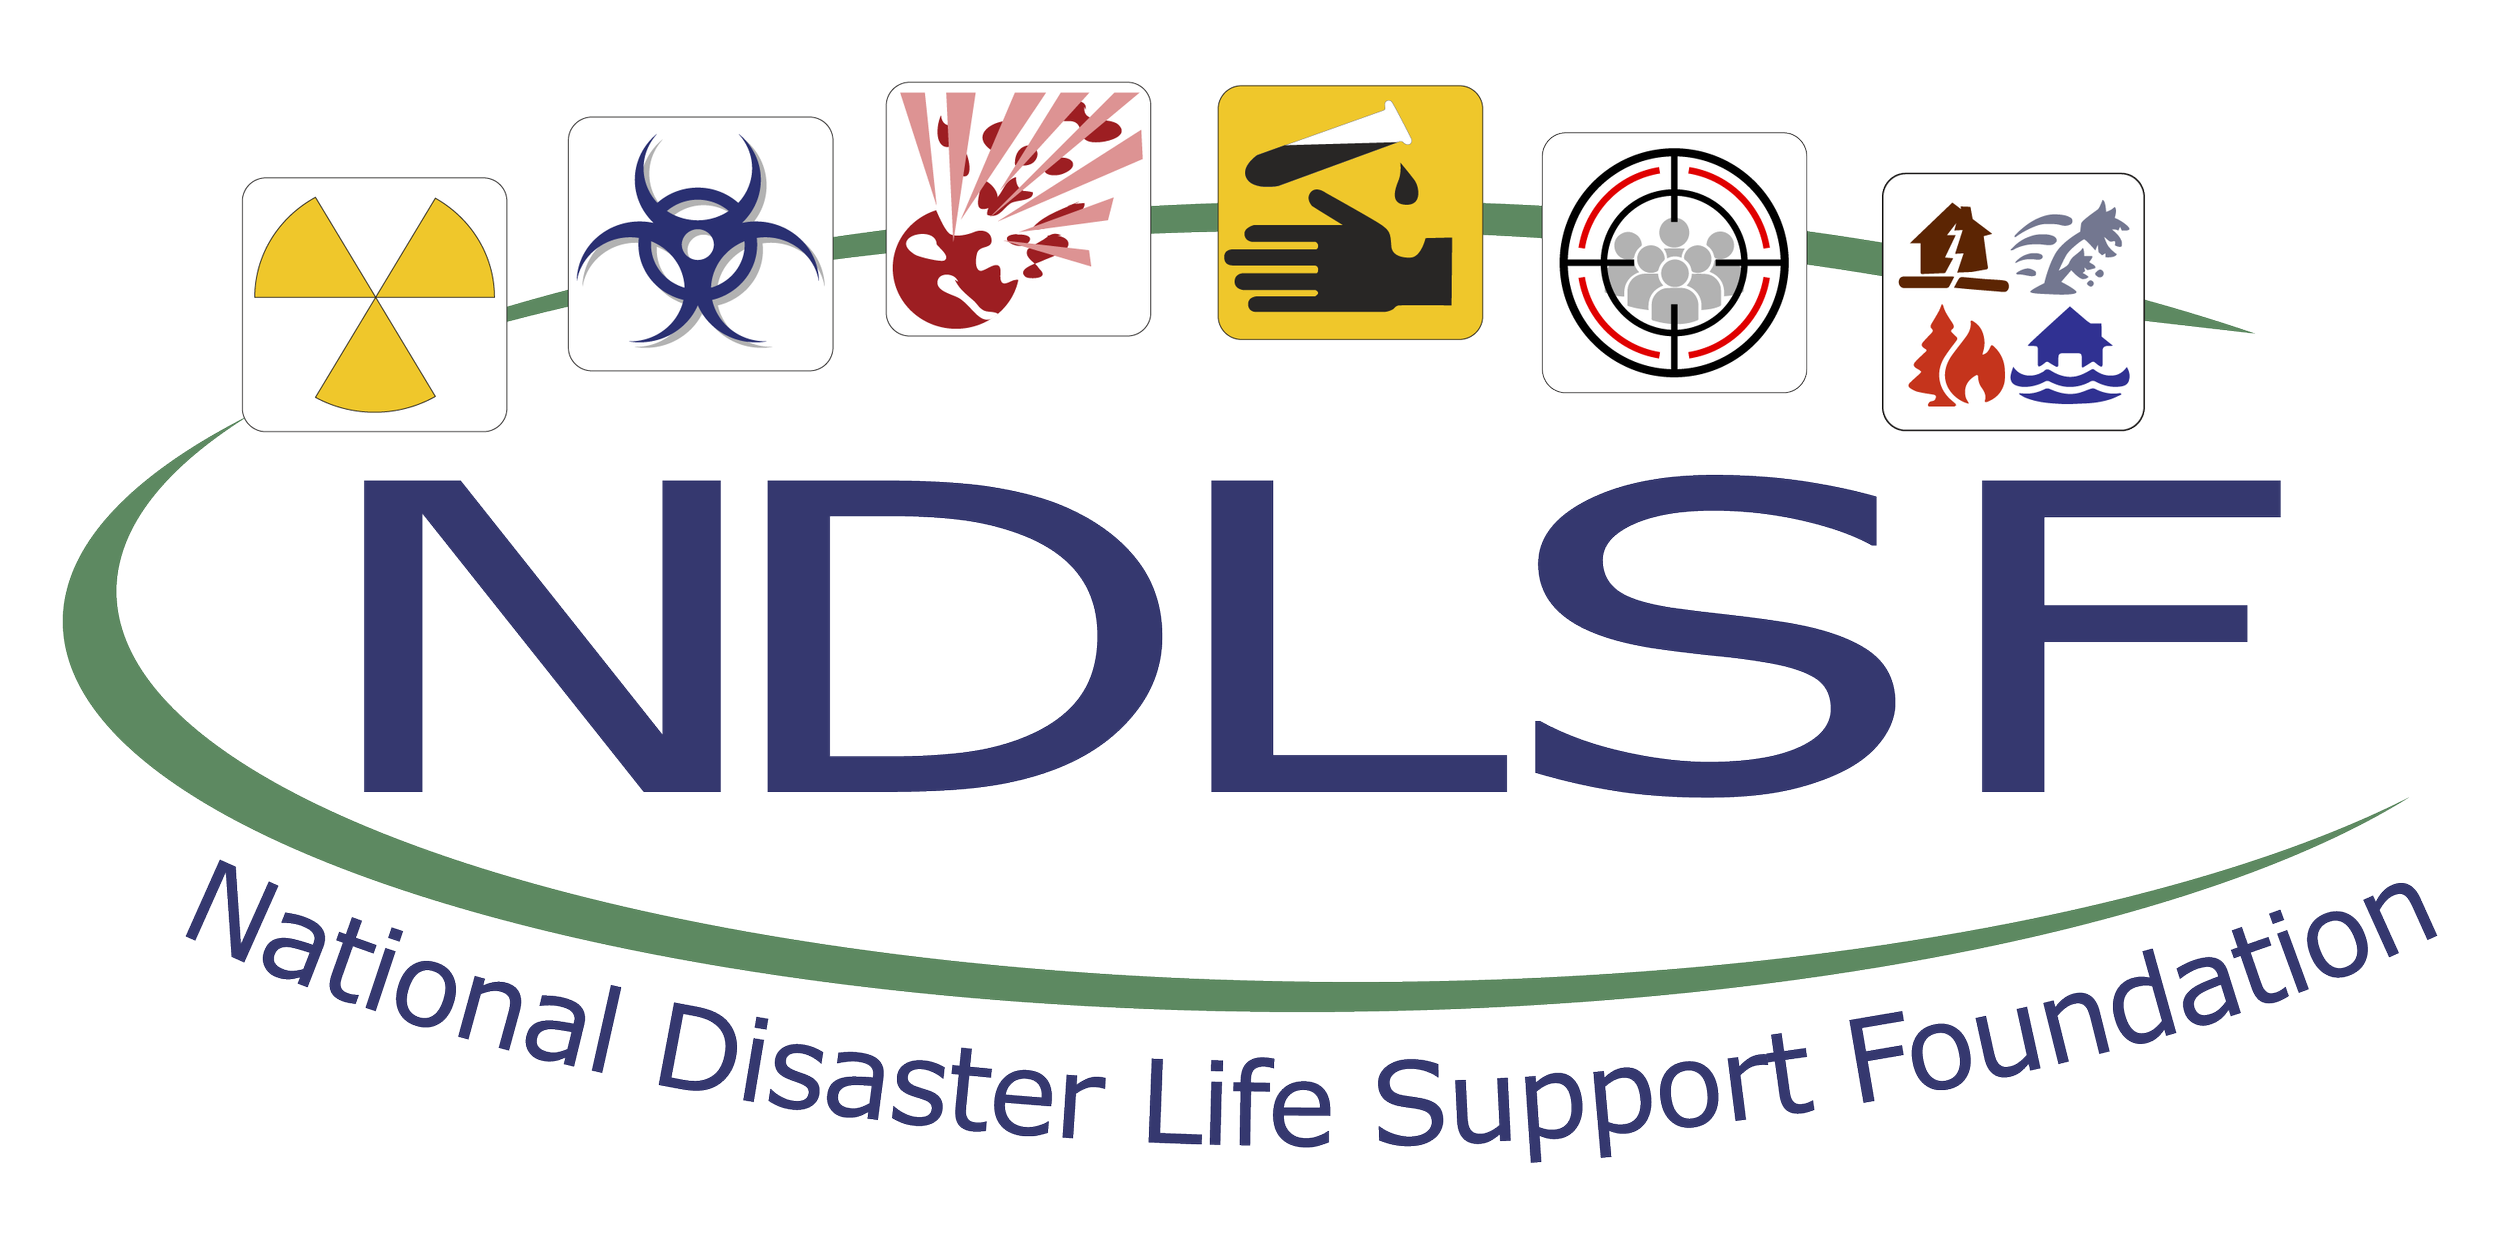 National Disaster Life Support Foundation (NDLSF)